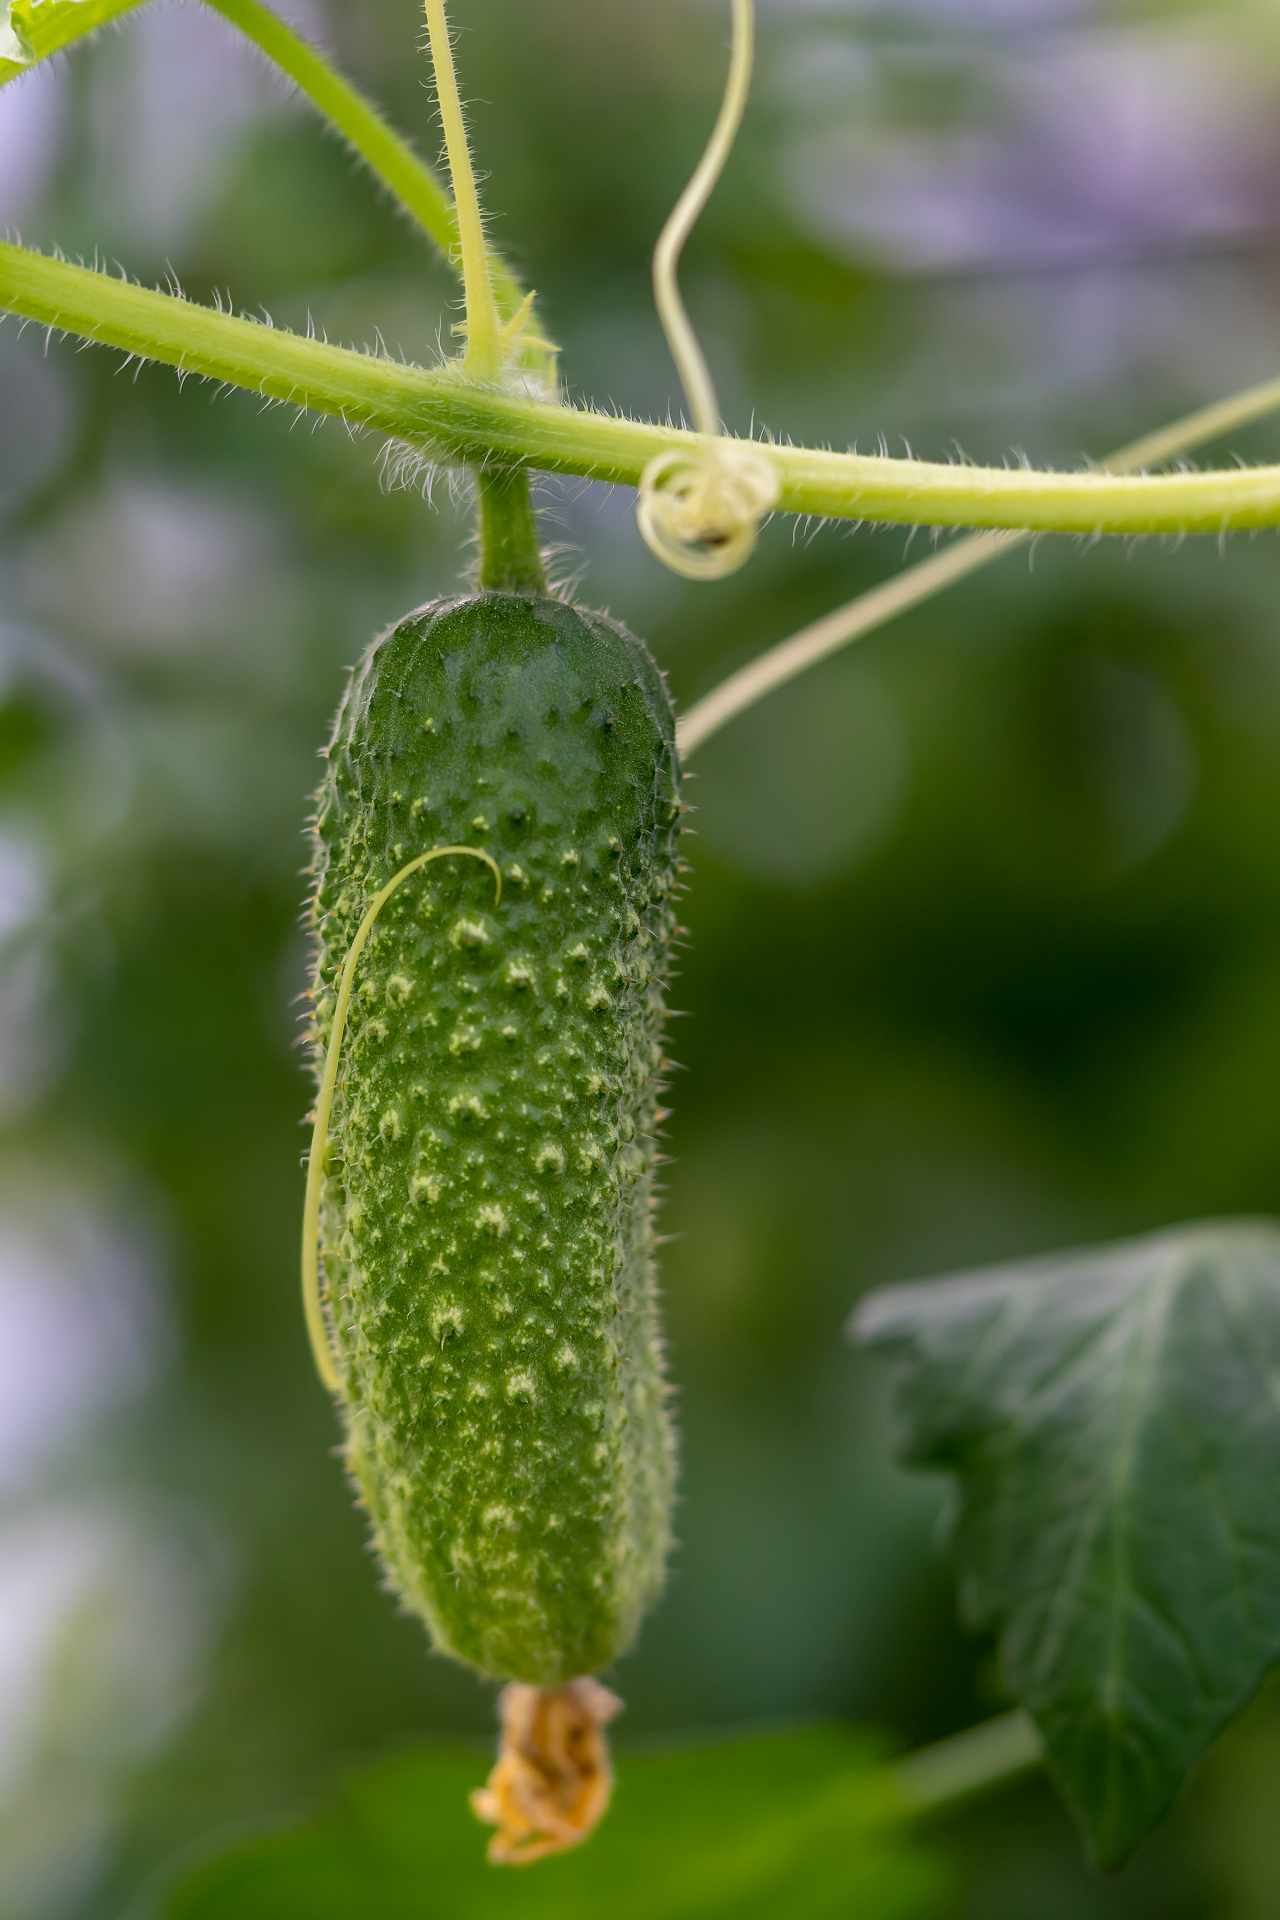 Image of a fresh cucumber on a vine.